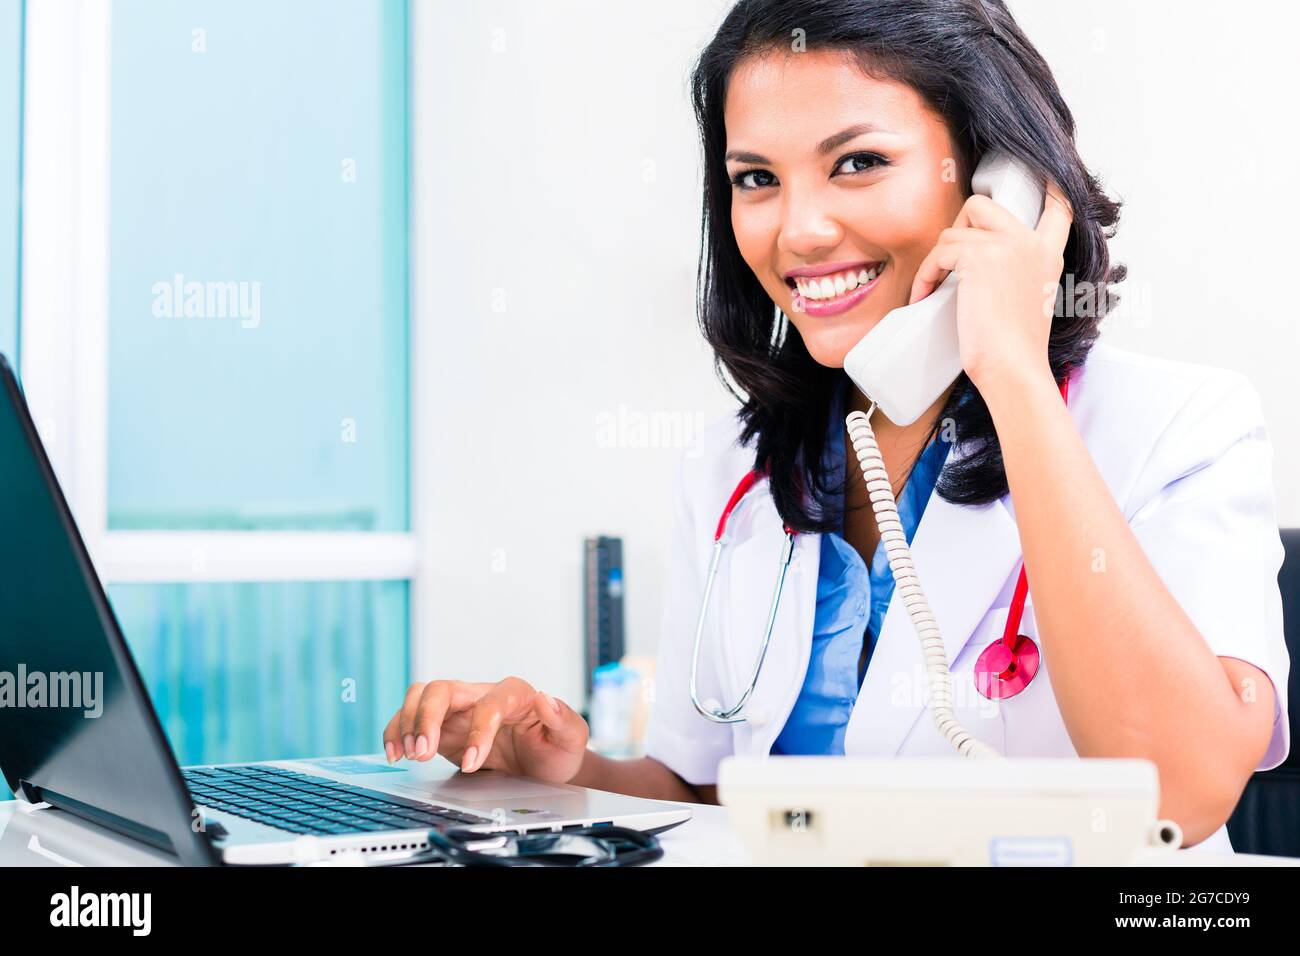 Asian female doctor working and telephoning in office or medical practice Stock Photo